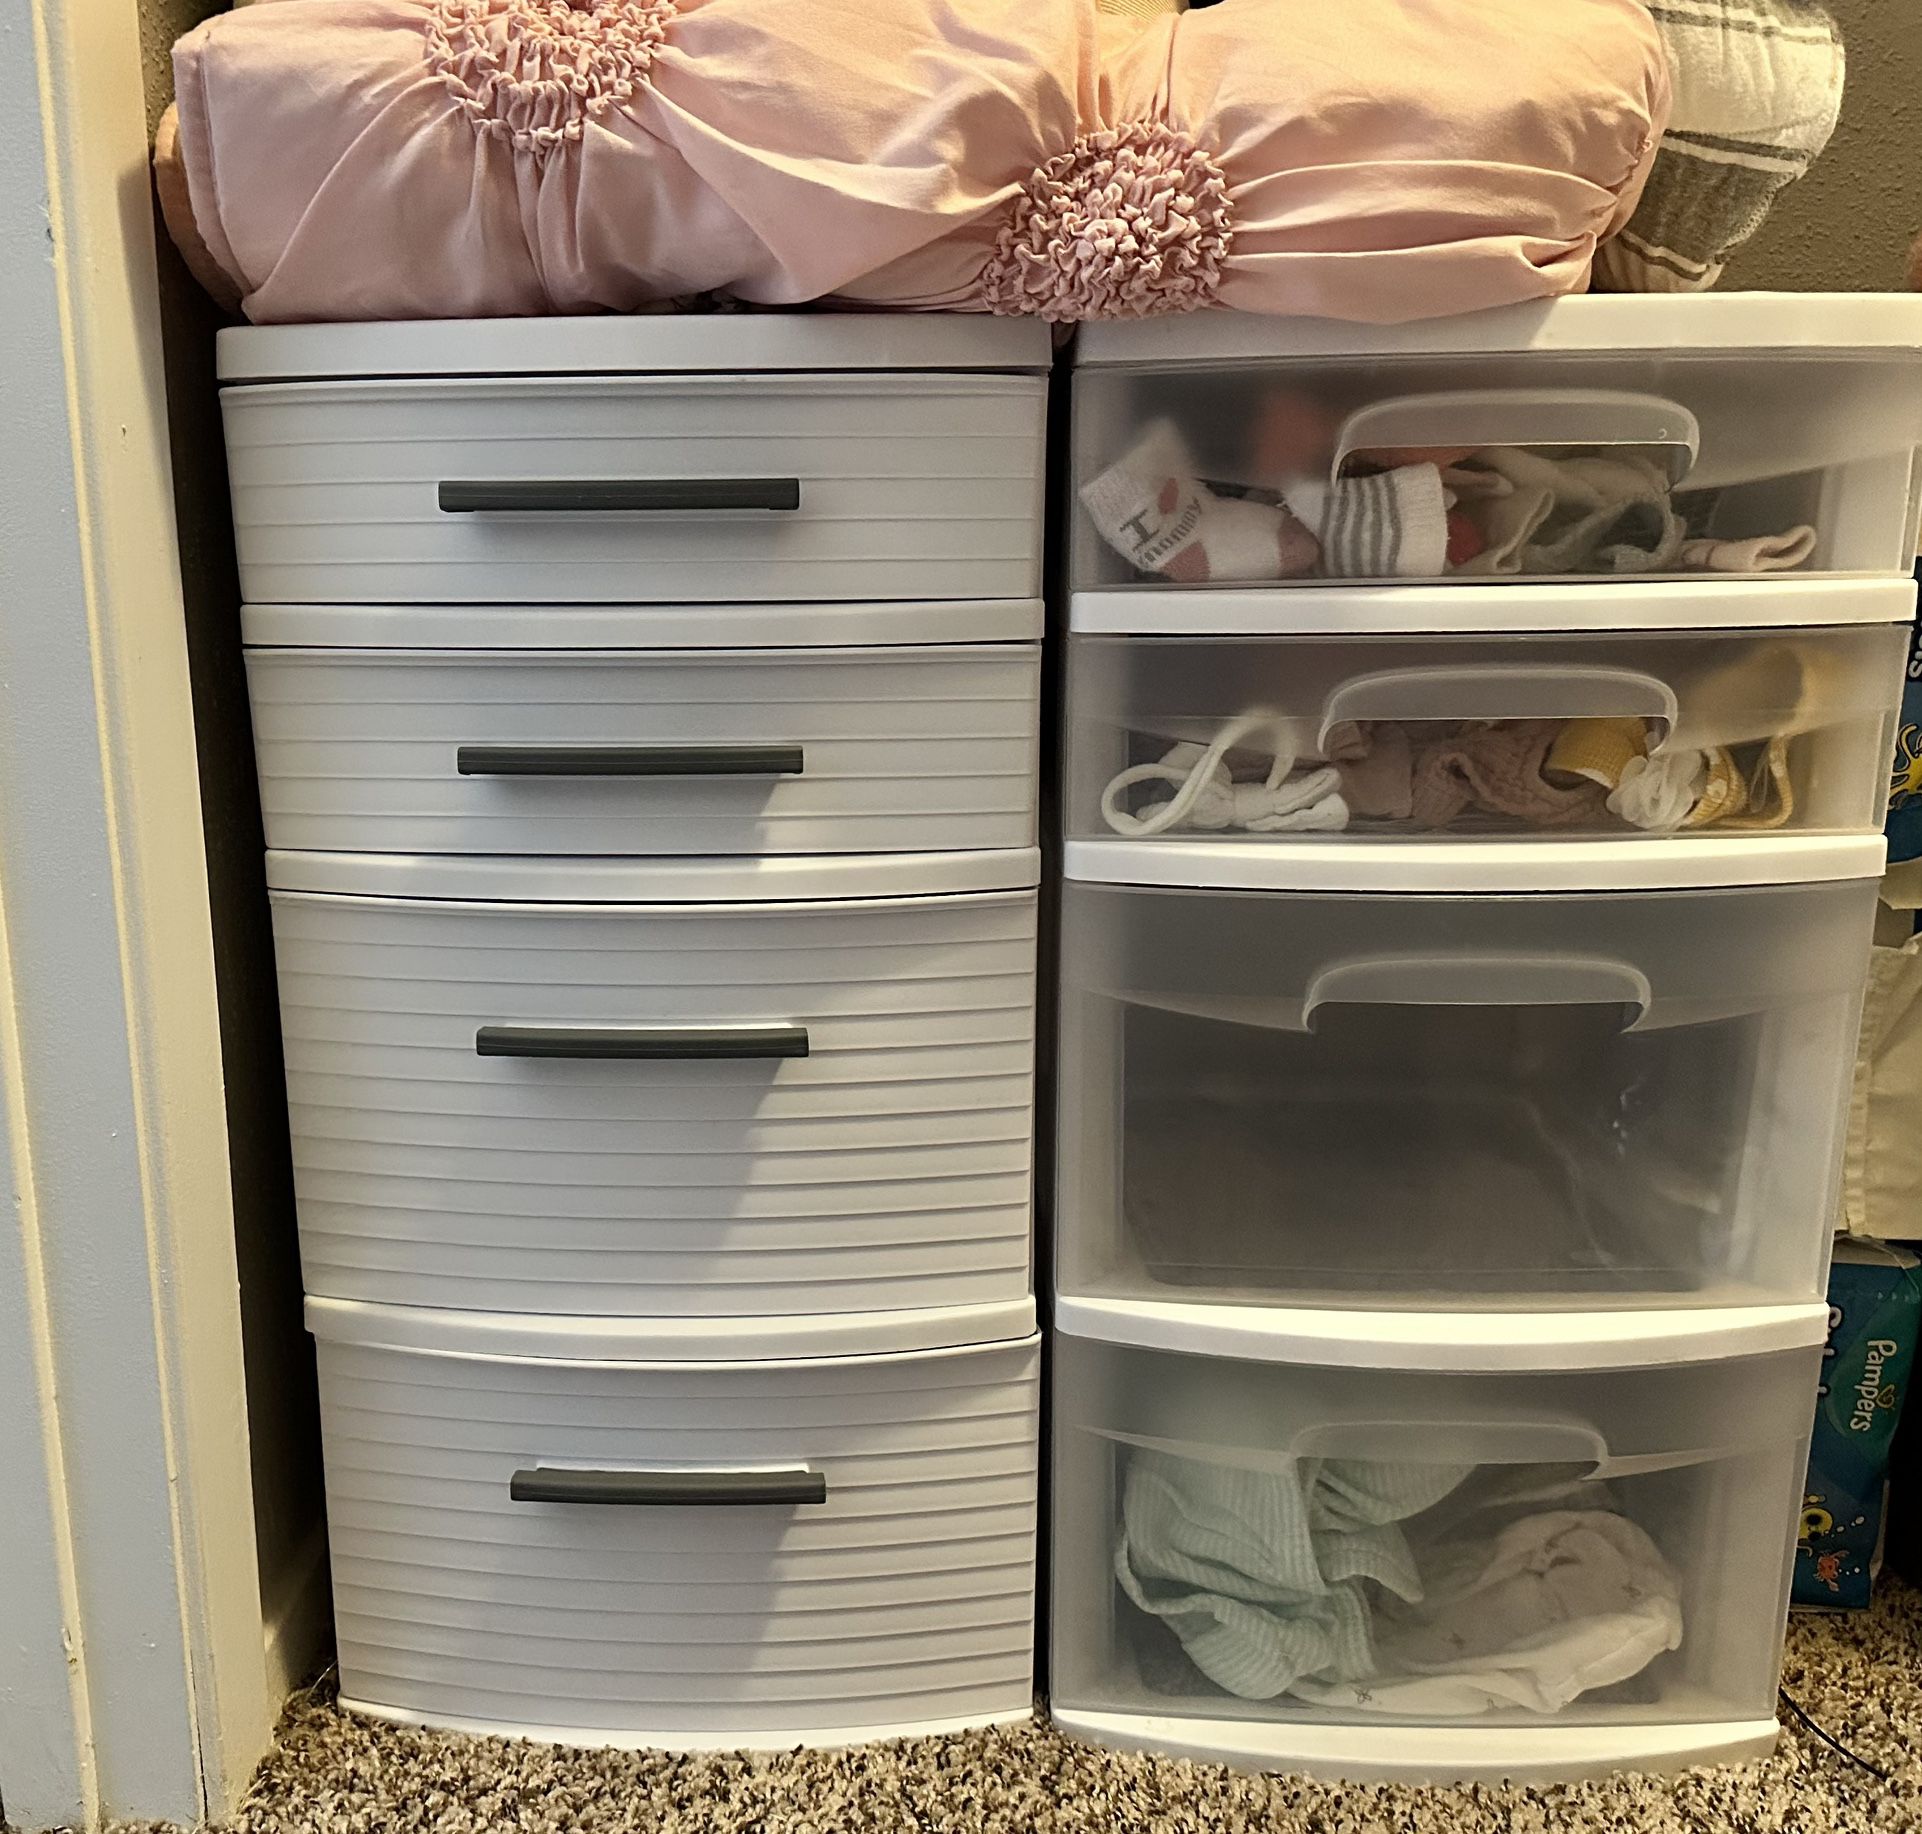 (2) Storage Containers With Drawers